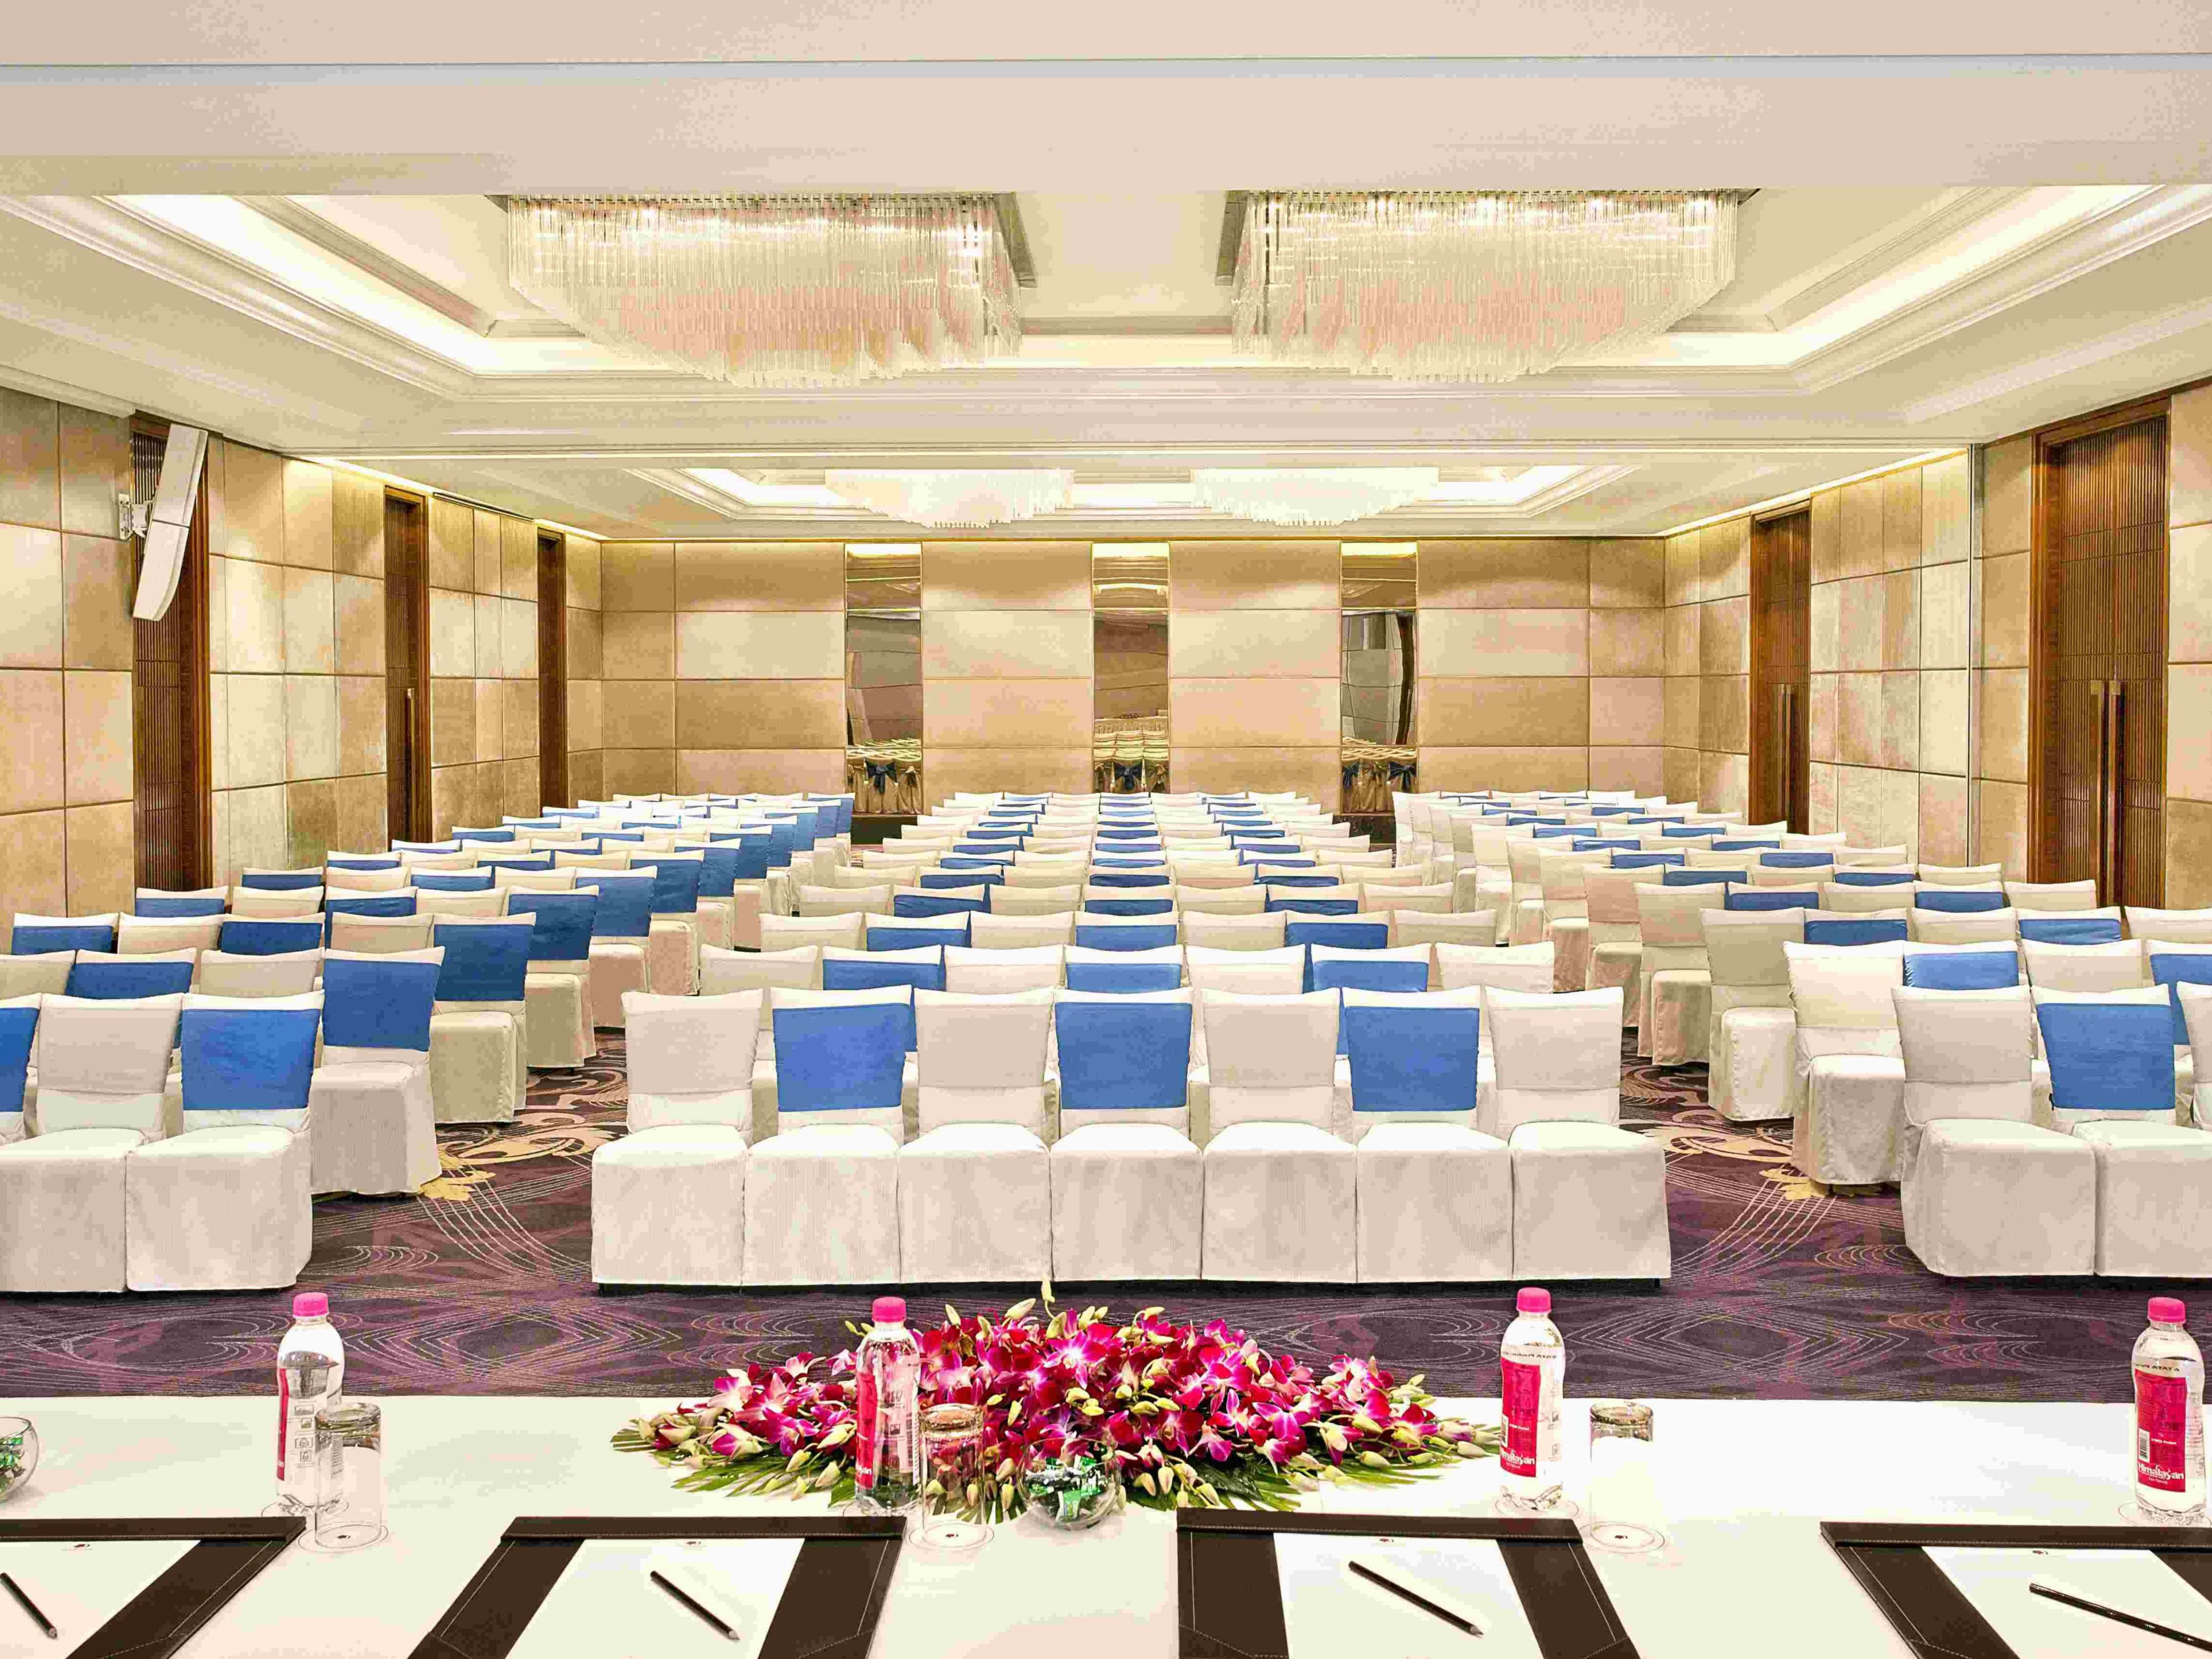 The hotel’s 5,000 ft² conference and events space accommodates up to 550 people and is ideal for corporate meetings, business events, conferences, social gatherings and private receptions. Pre-function area with separate entrance provides a unique experience to the guests.